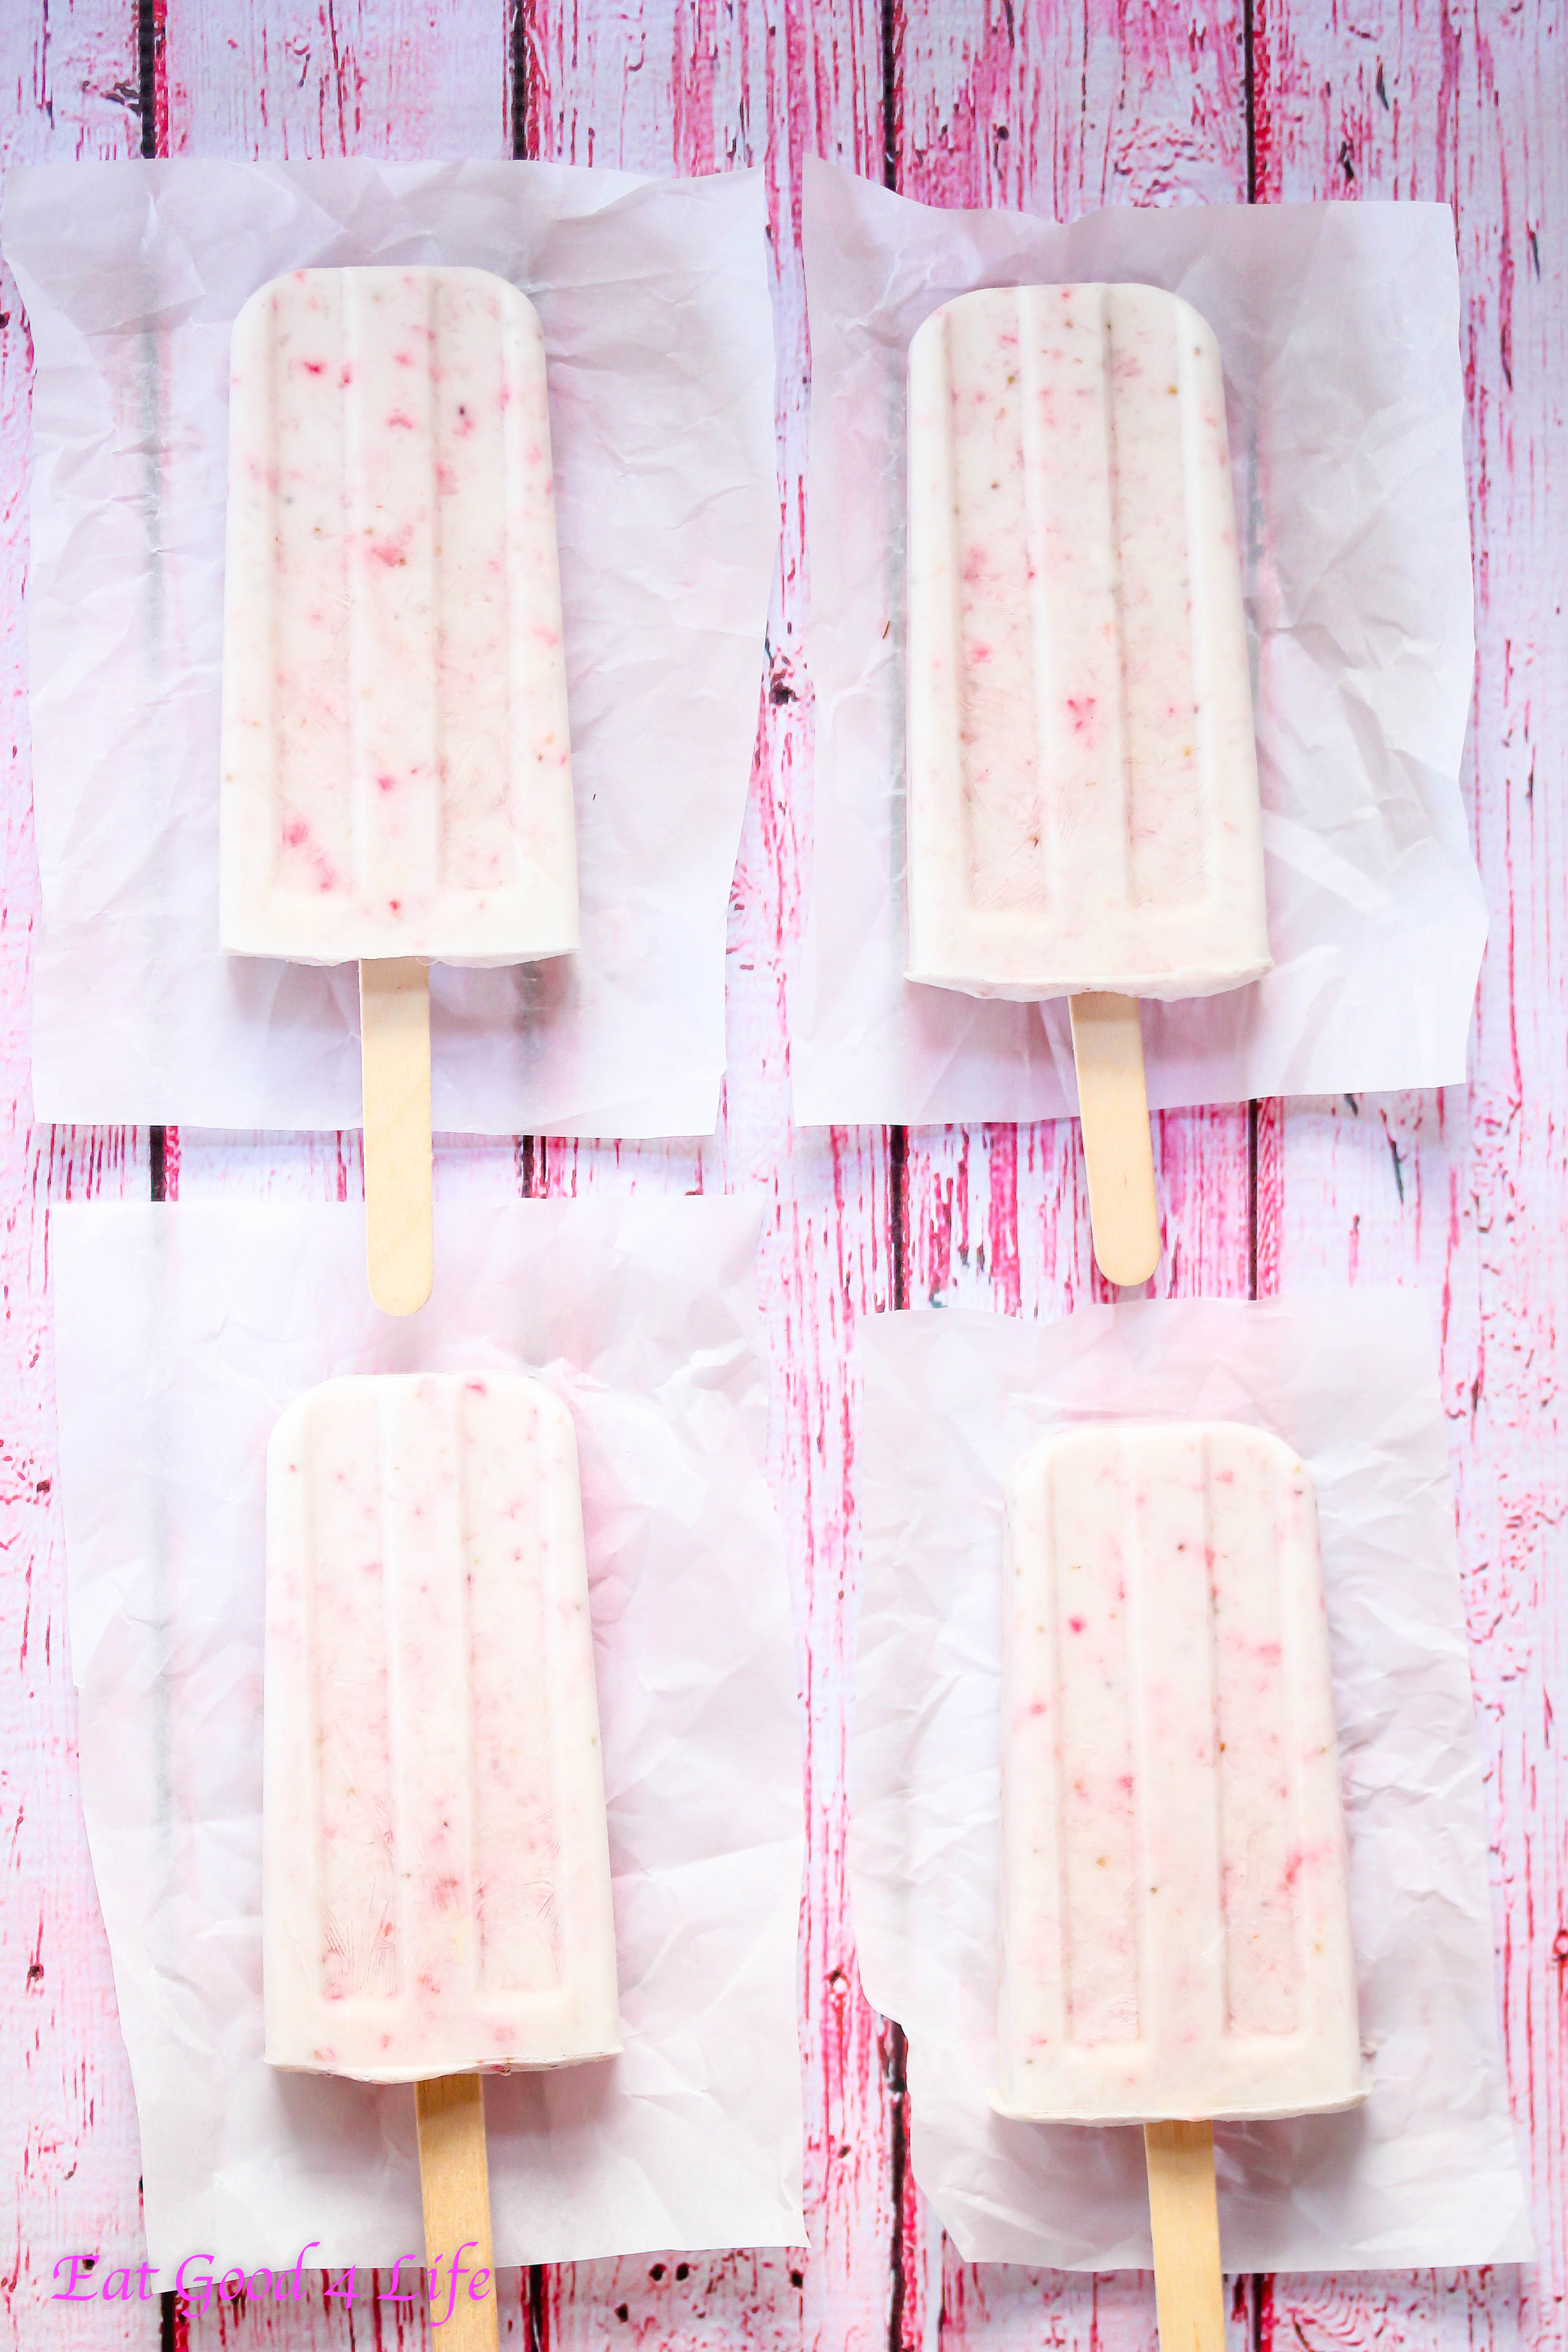 Strawberry and coconut popsicles